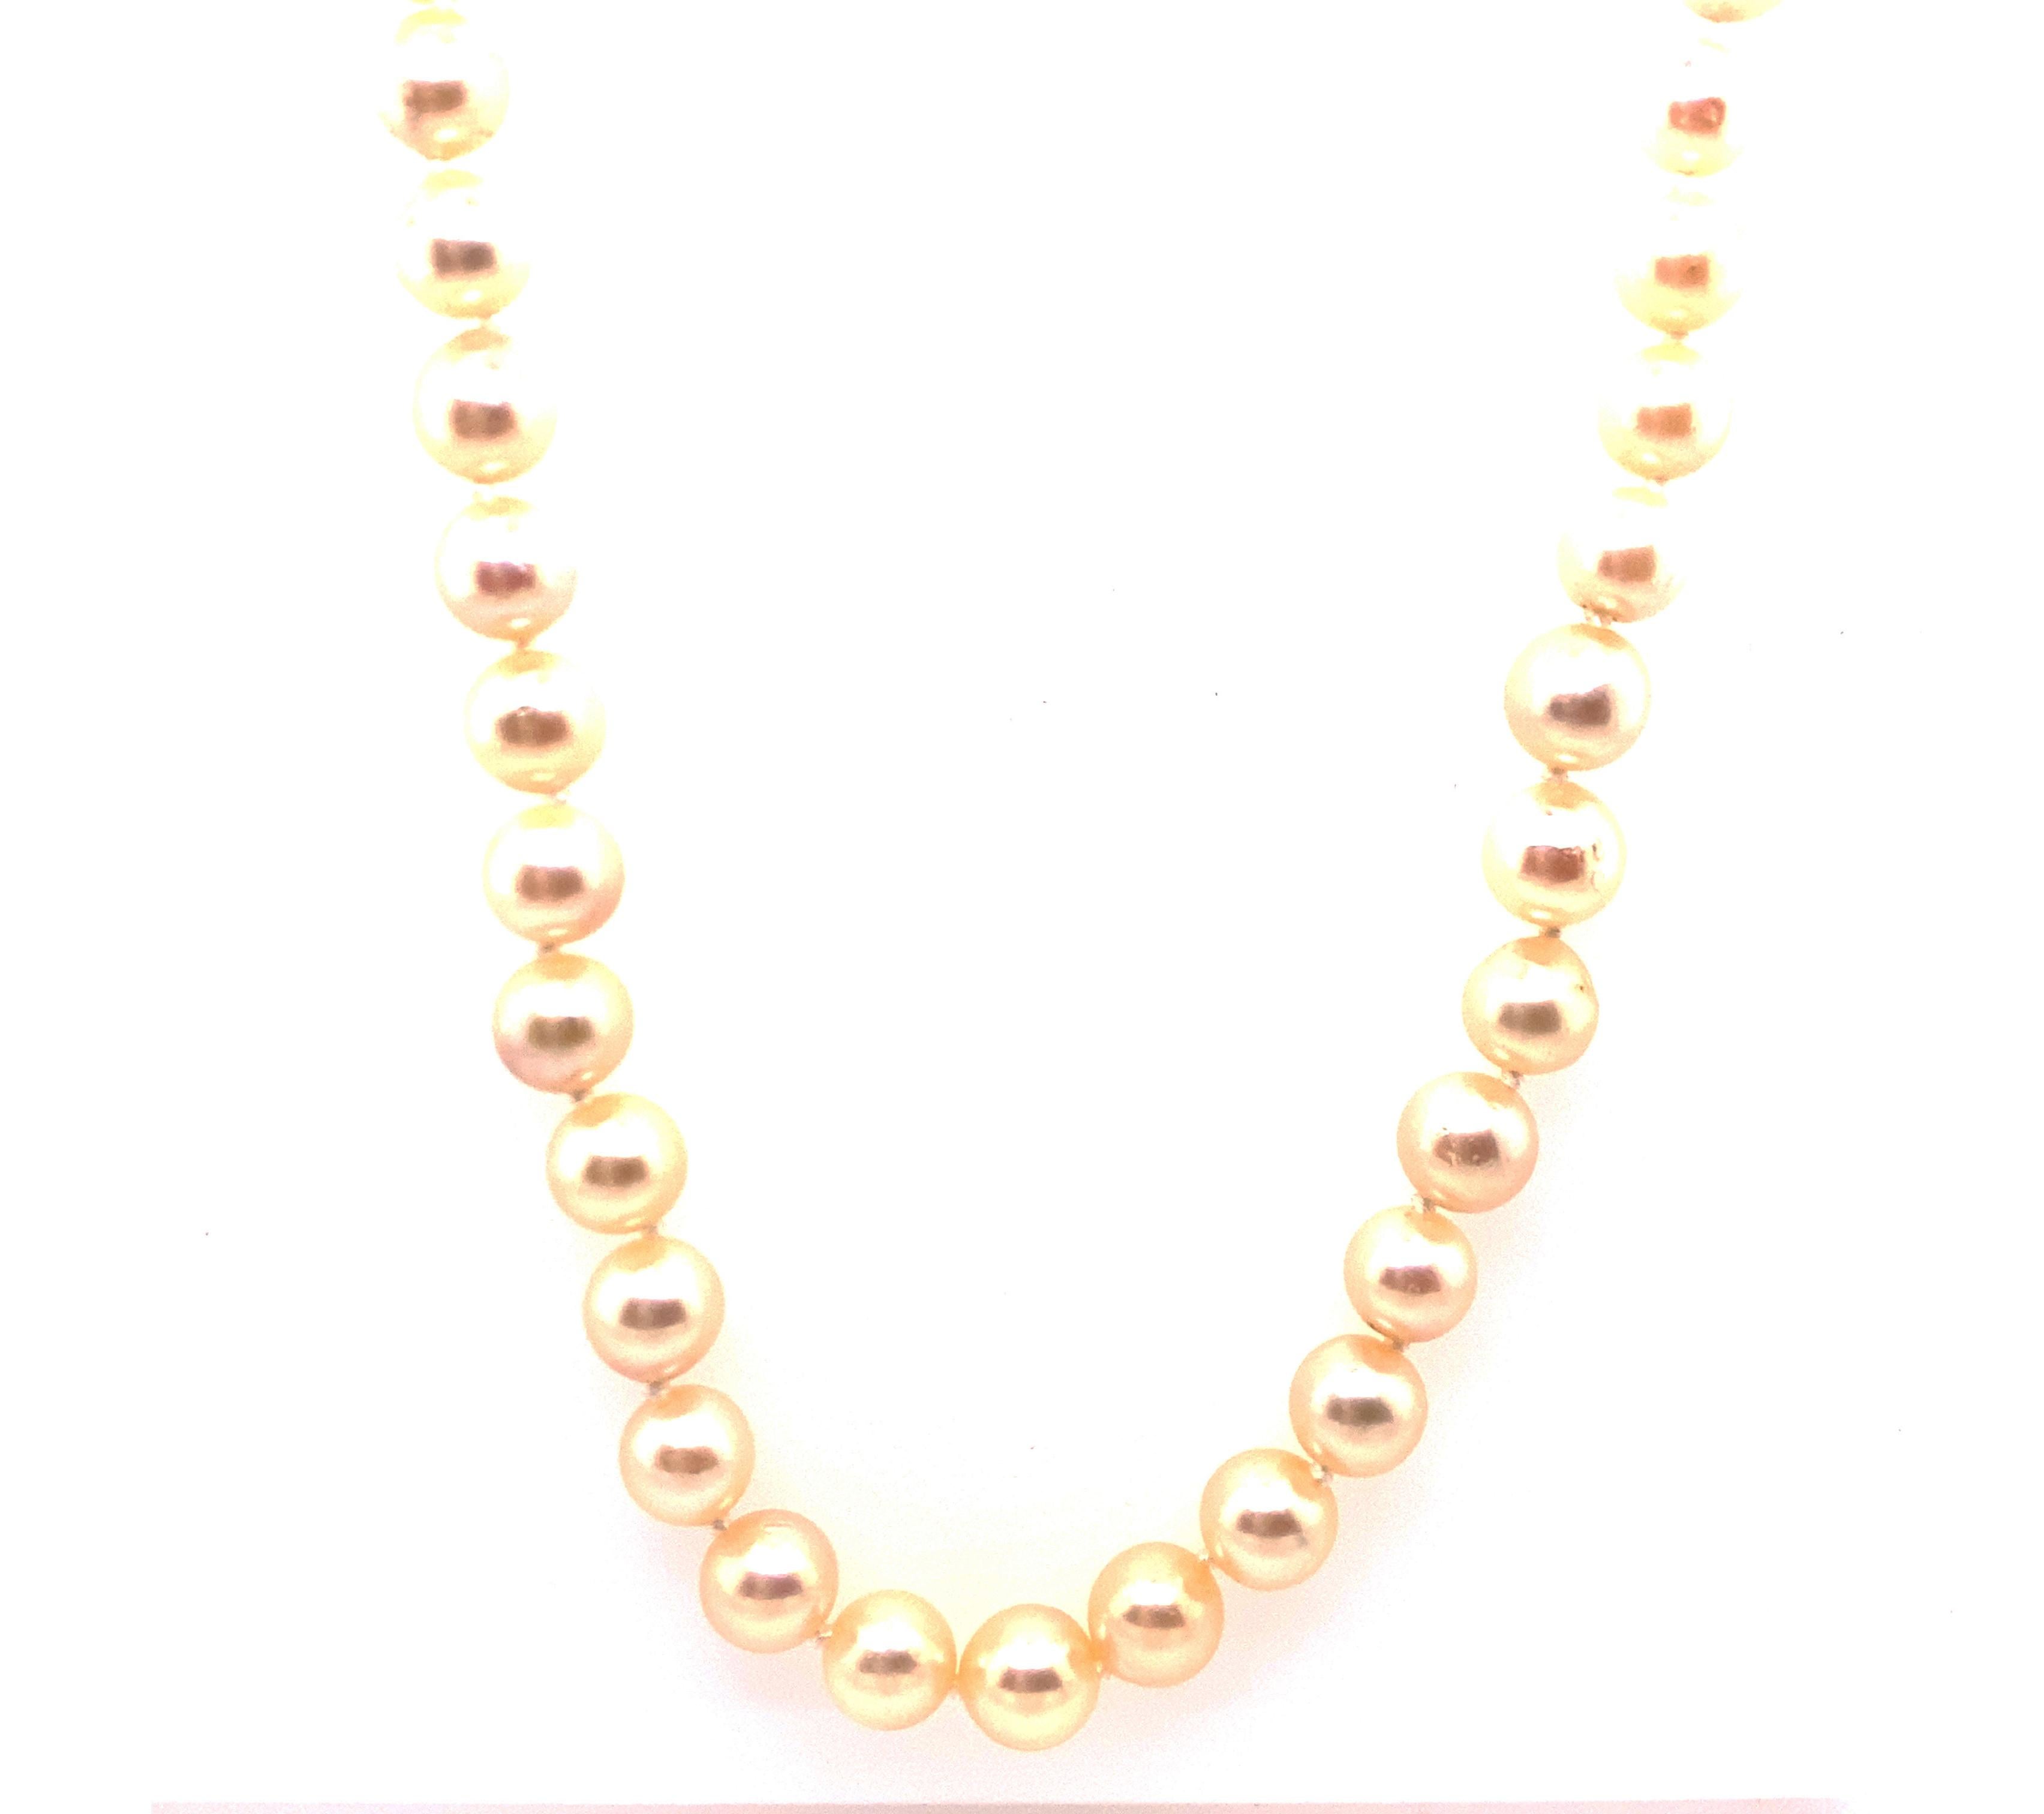 Genuine Original Antique from 1950's-1960's Vintage 7.5mm Pearl 14K Gold 30 Inch Necklace/Strand of Pearls Retro/Mid Century


Features 101 Genuine Natural 7-7.5mm Pearls

Solid 14K Yellow Gold Flower Clasp

100% Natural Pearls 

Get Noticed With